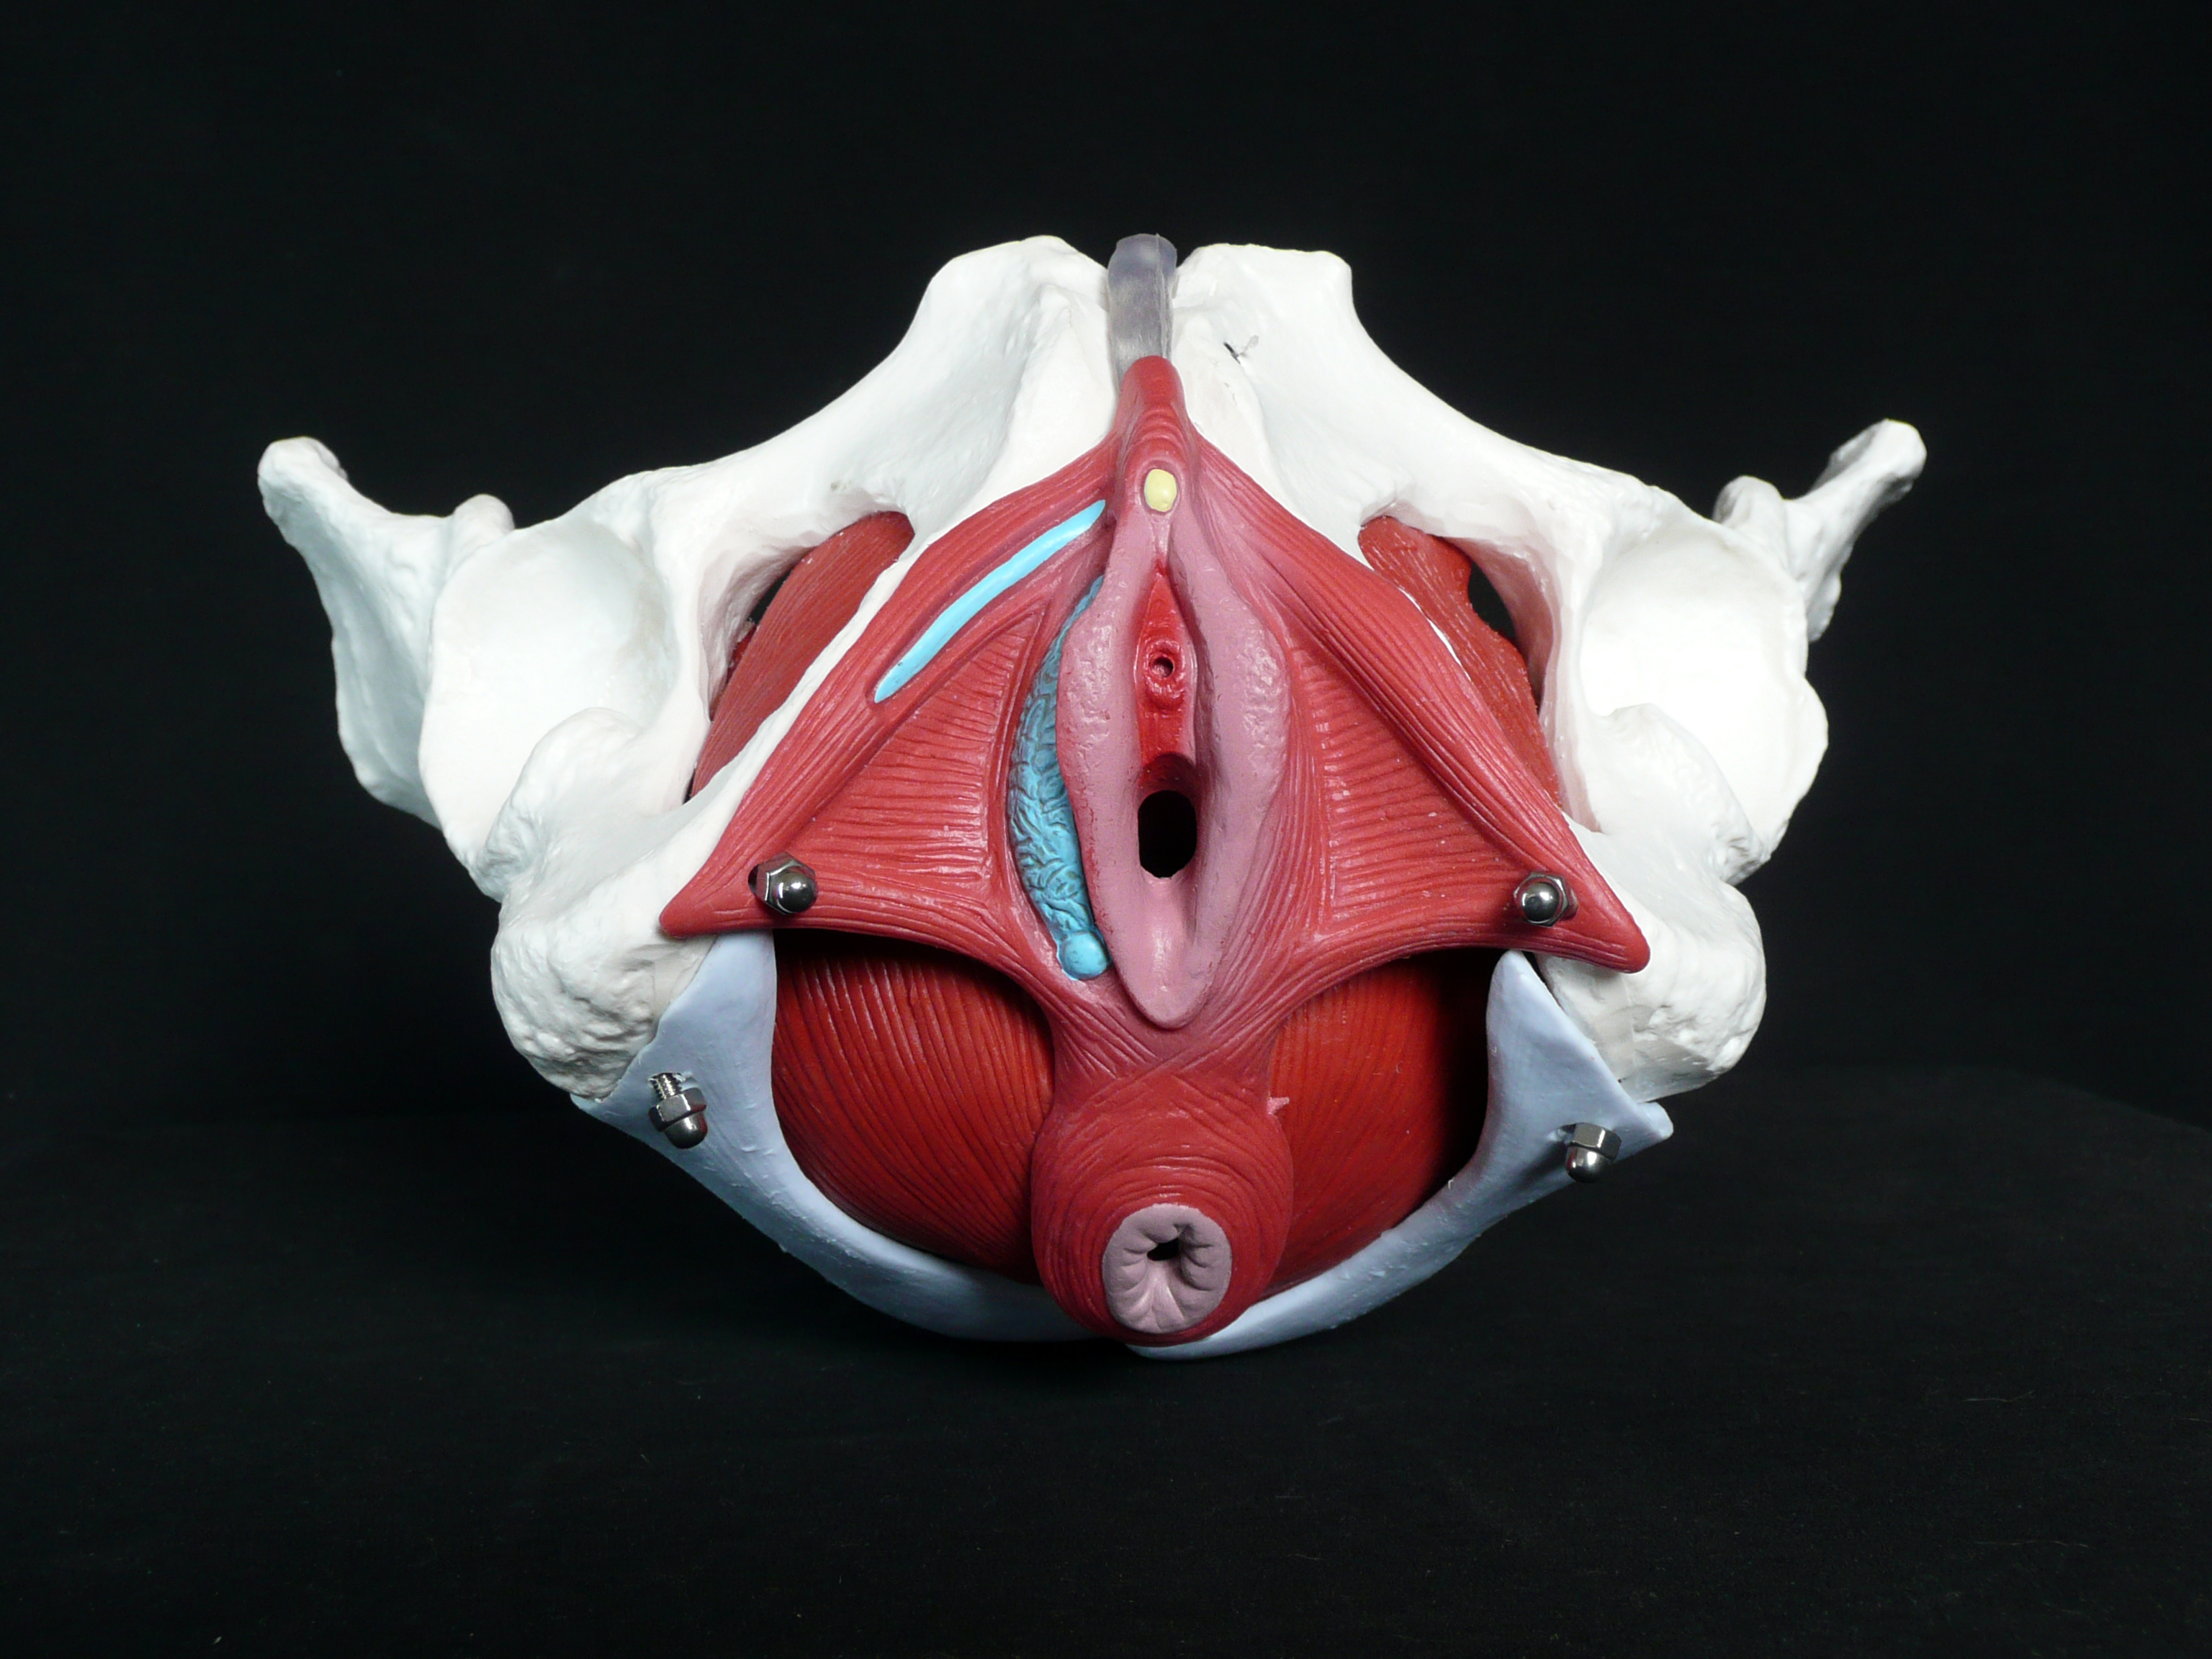 Life-Size Anatomical Human Female Pelvis with Removable Organs Model